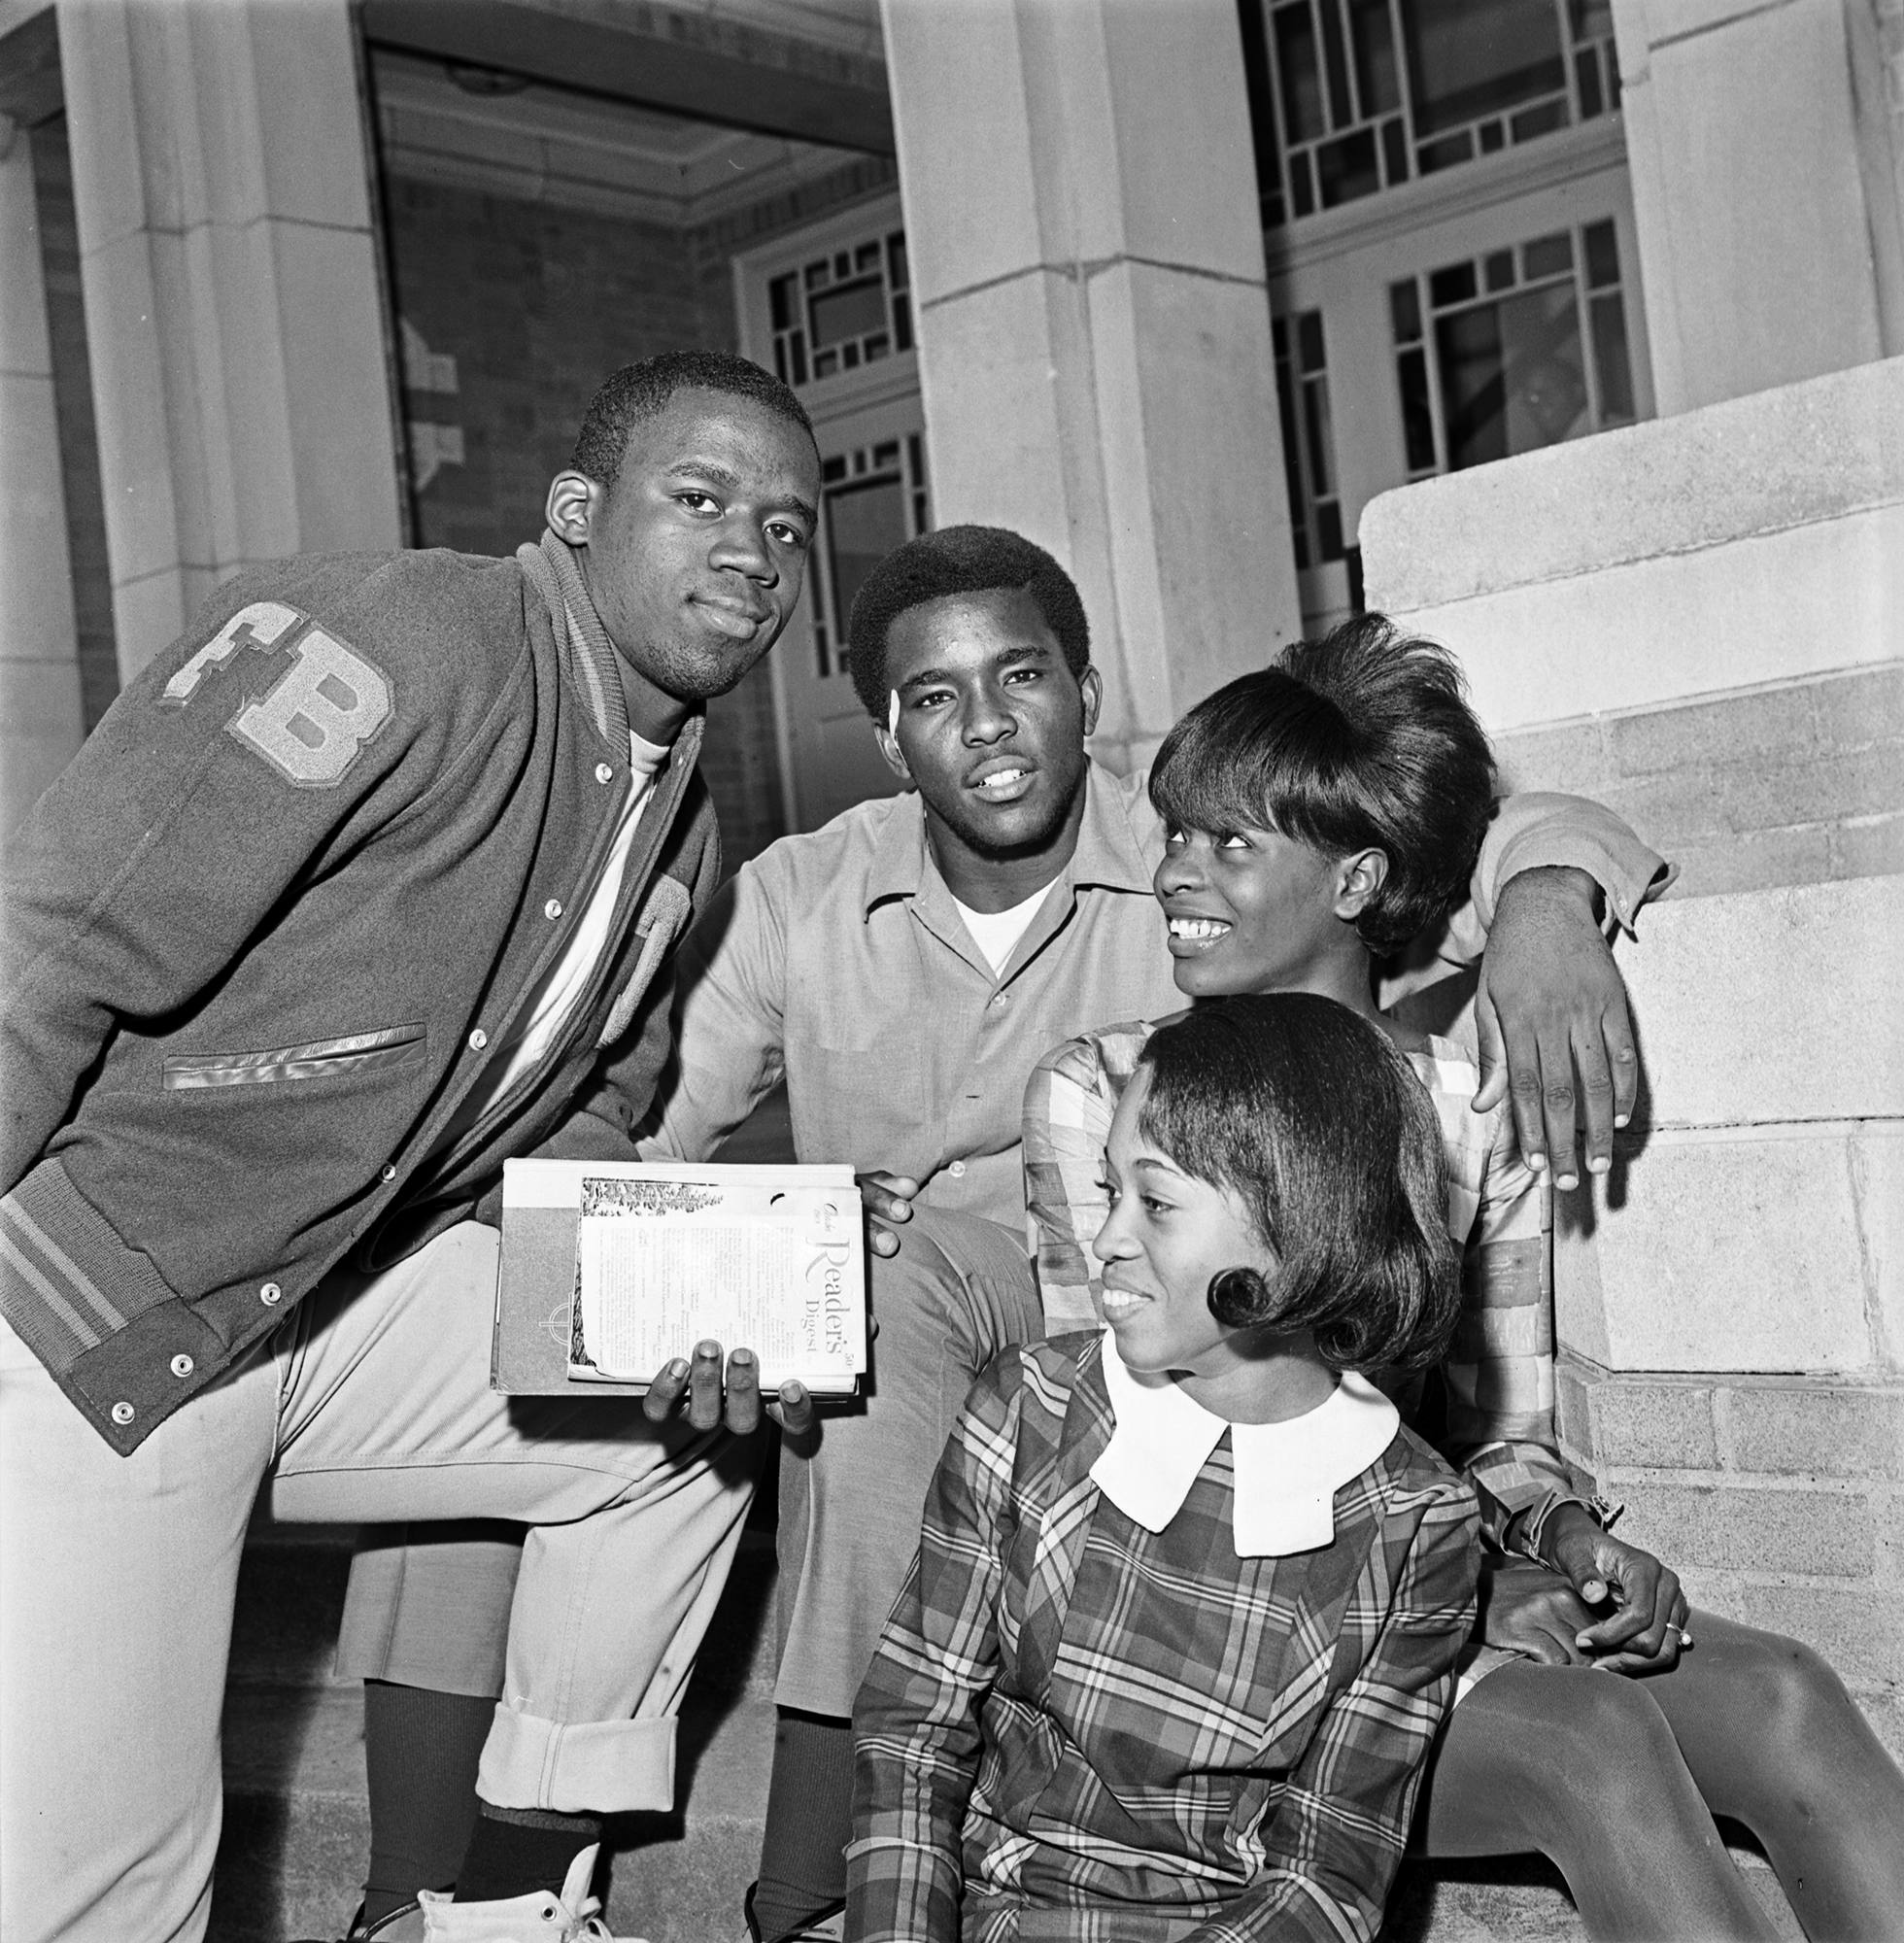 I. M. Terrell High School football players Joshua Smith, left, and Joel Williams are pictured with Teresa Barrett, top right, and Edwena Chandler during a class break.